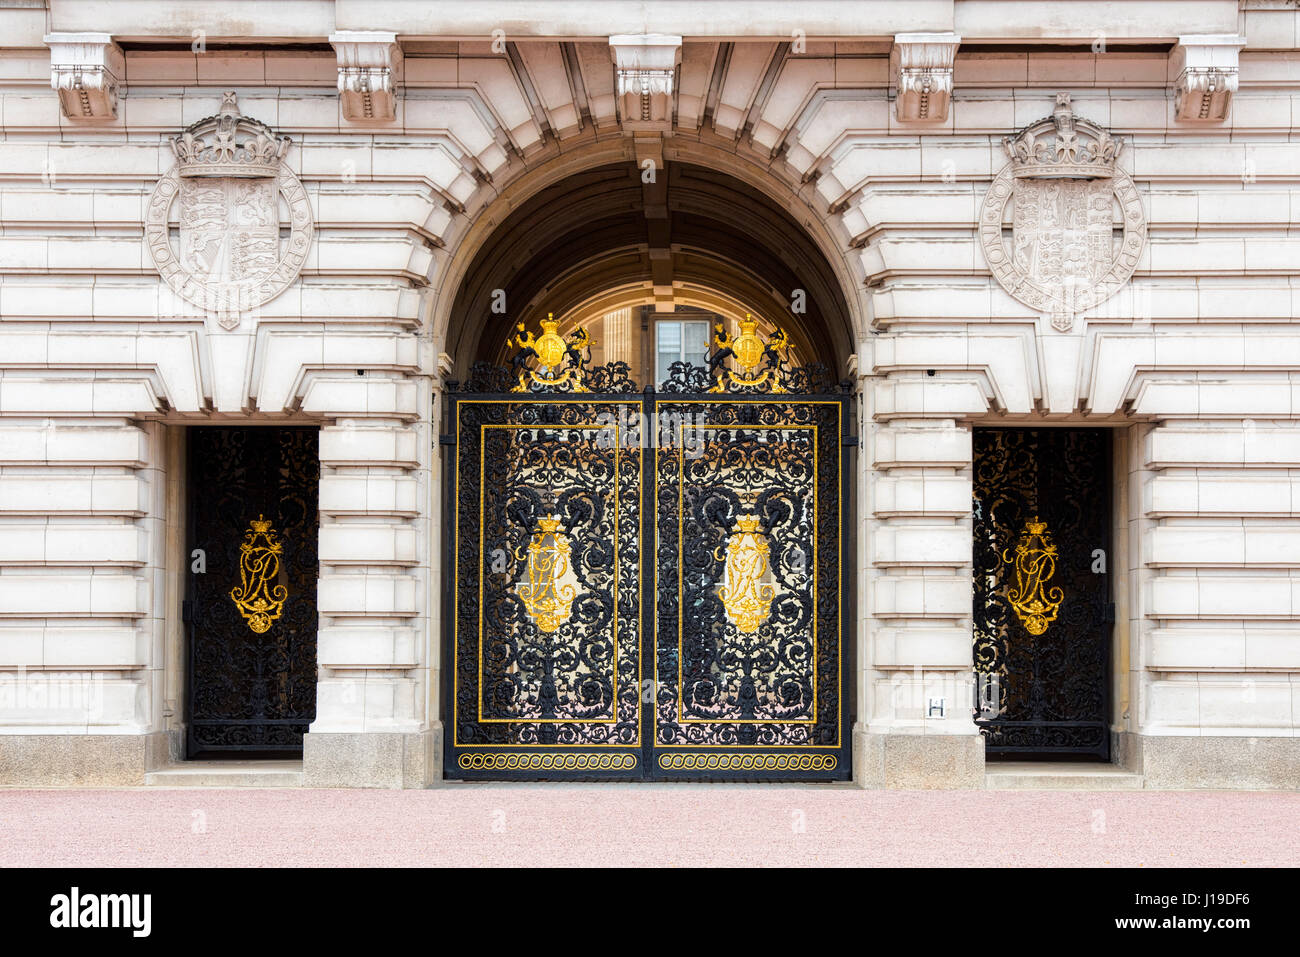 Gilded ornament gates in Buckingham Palace. City of Westminster, London, England Stock Photo